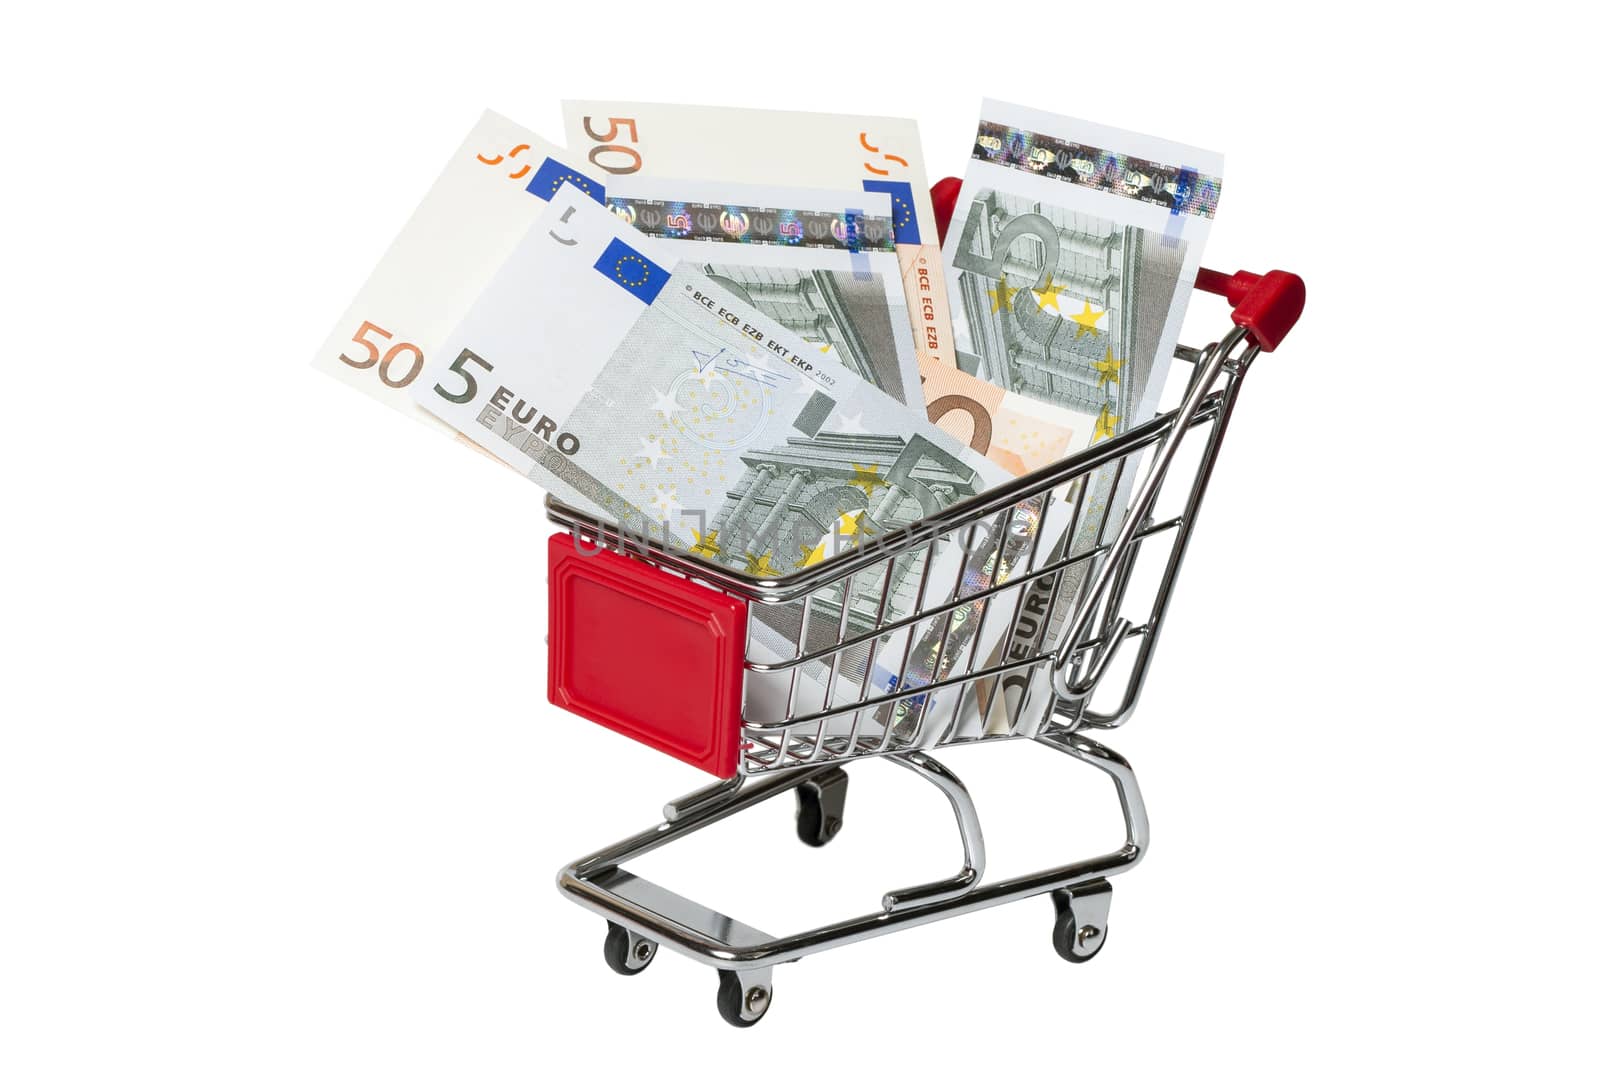 Shopping cart with banknotes of 5 and 50 euro on a white background